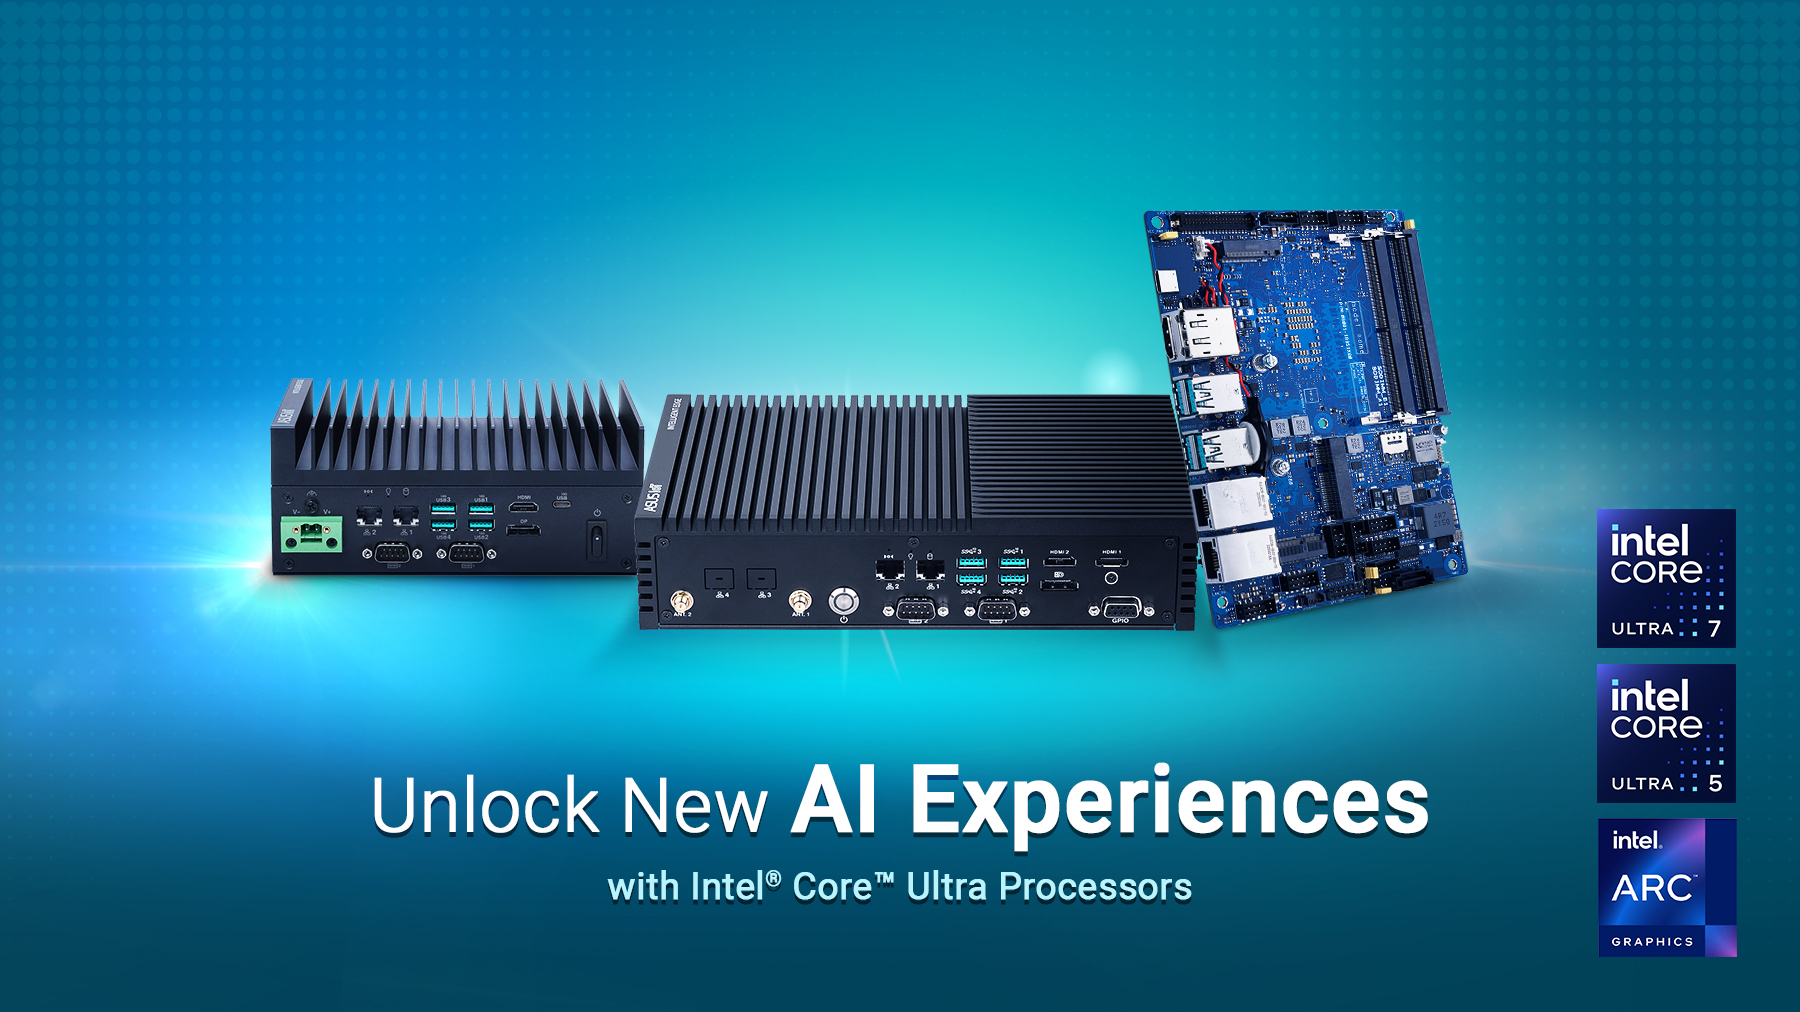 C7146ES-IM-AA single-board computer, EBS-S500W edge computer and PE2200U ultra-compact fanless embedded computer stand side by side in the center of product family photo with Intel Core Ultra 7, Intel Core Ultra 5 and Intel ARC badges at the corner showing new AI experiences message. 